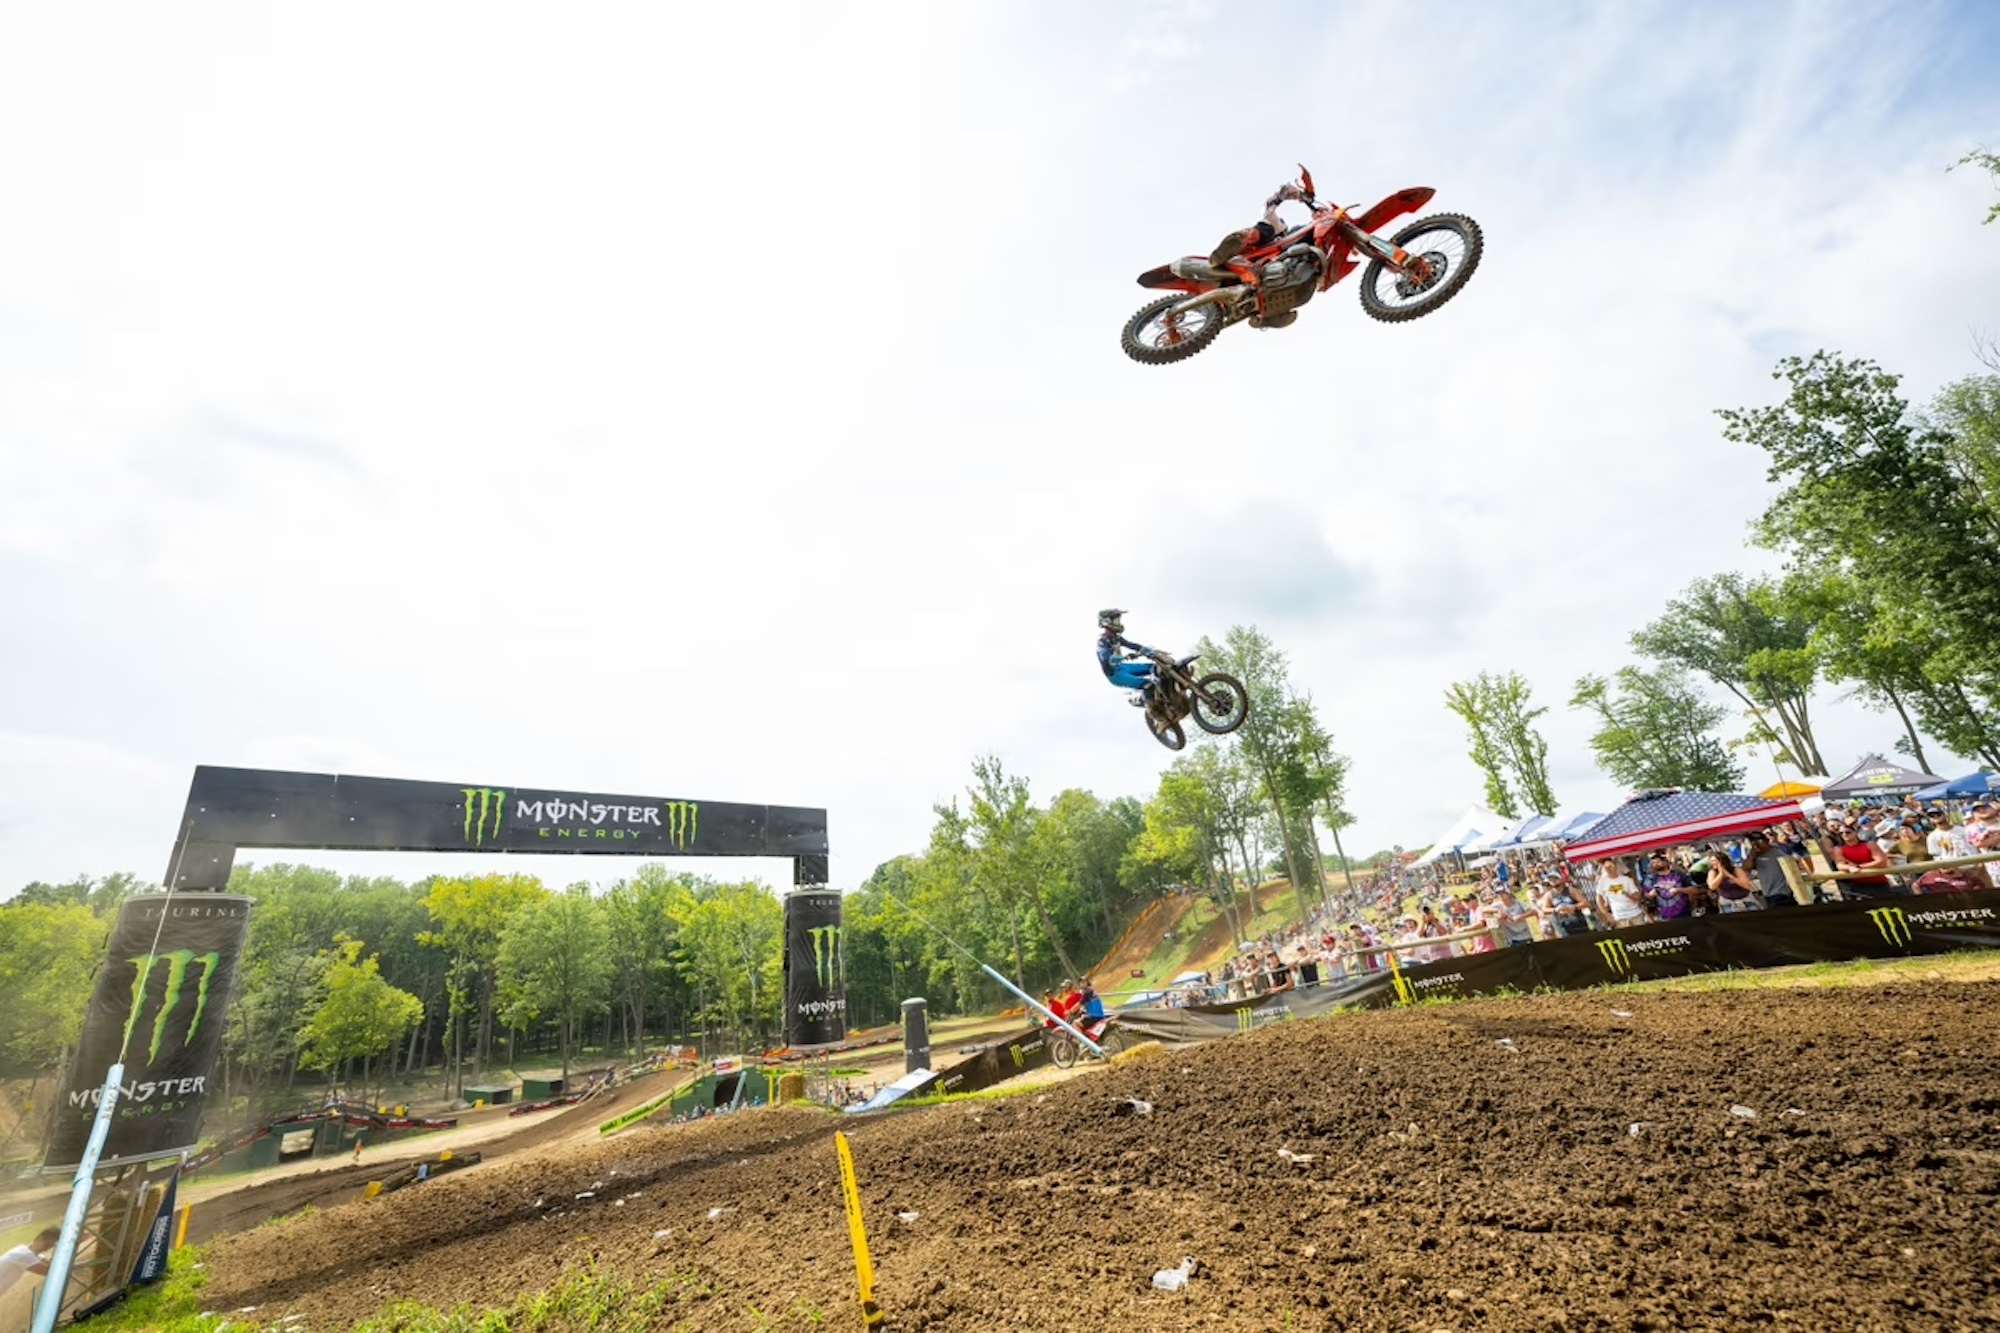 A view of the 2023 AMA Pro MX Championship efforts. Media provided by Pro Motocross.